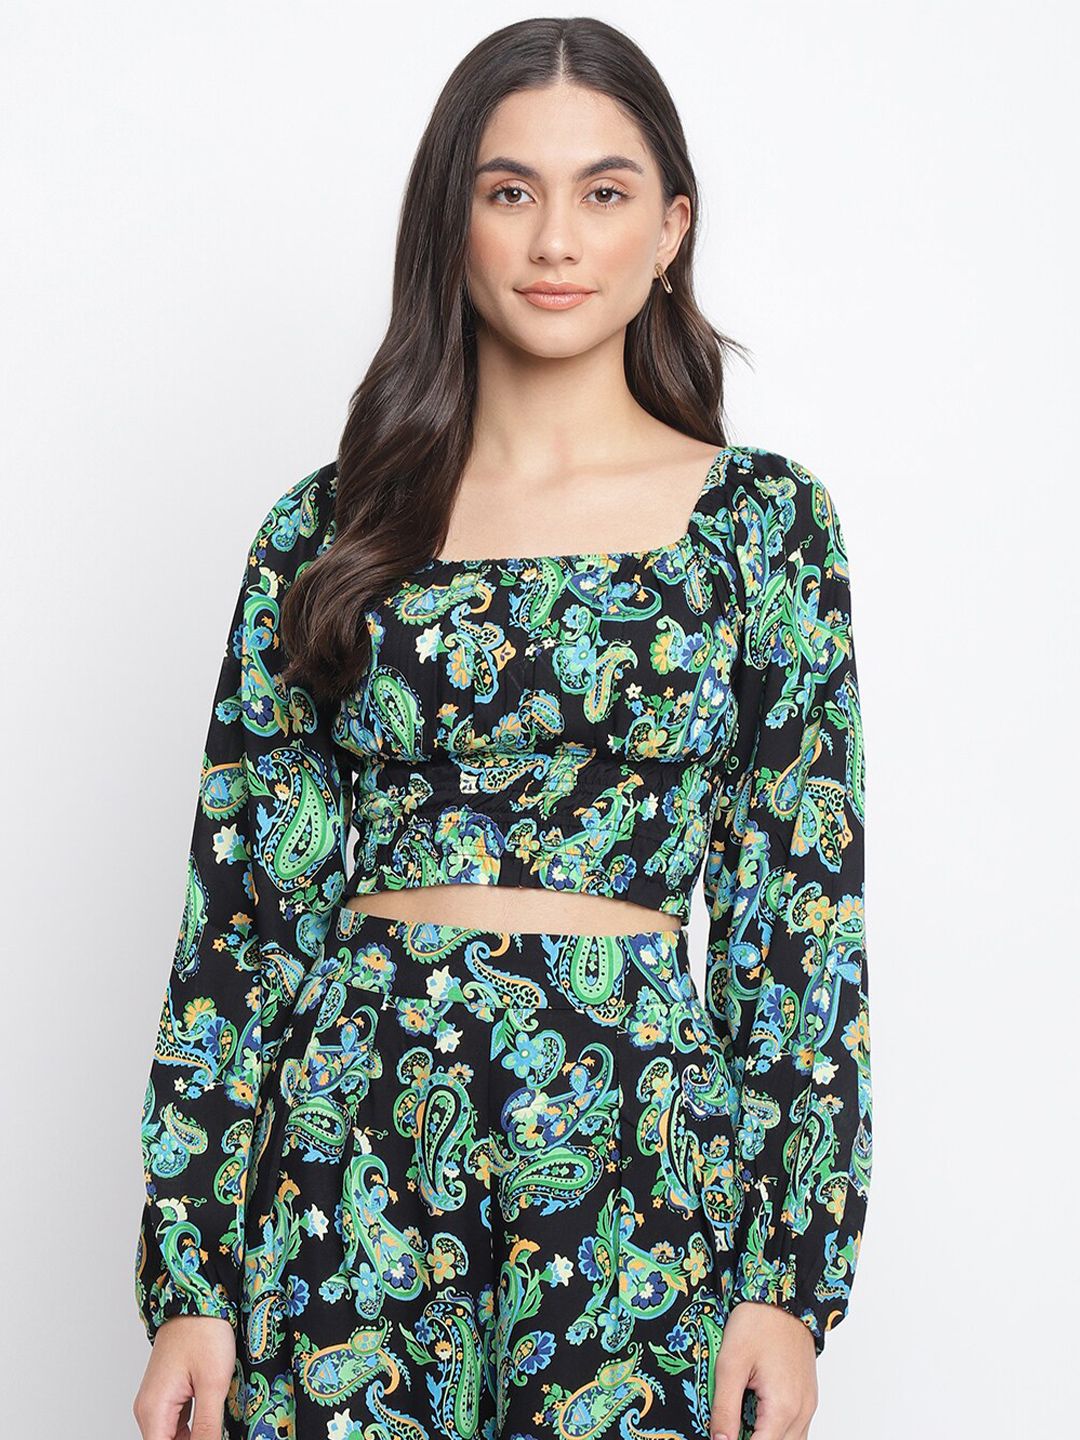 Fabindia Women Black And Green Floral Print Crop Top Price in India